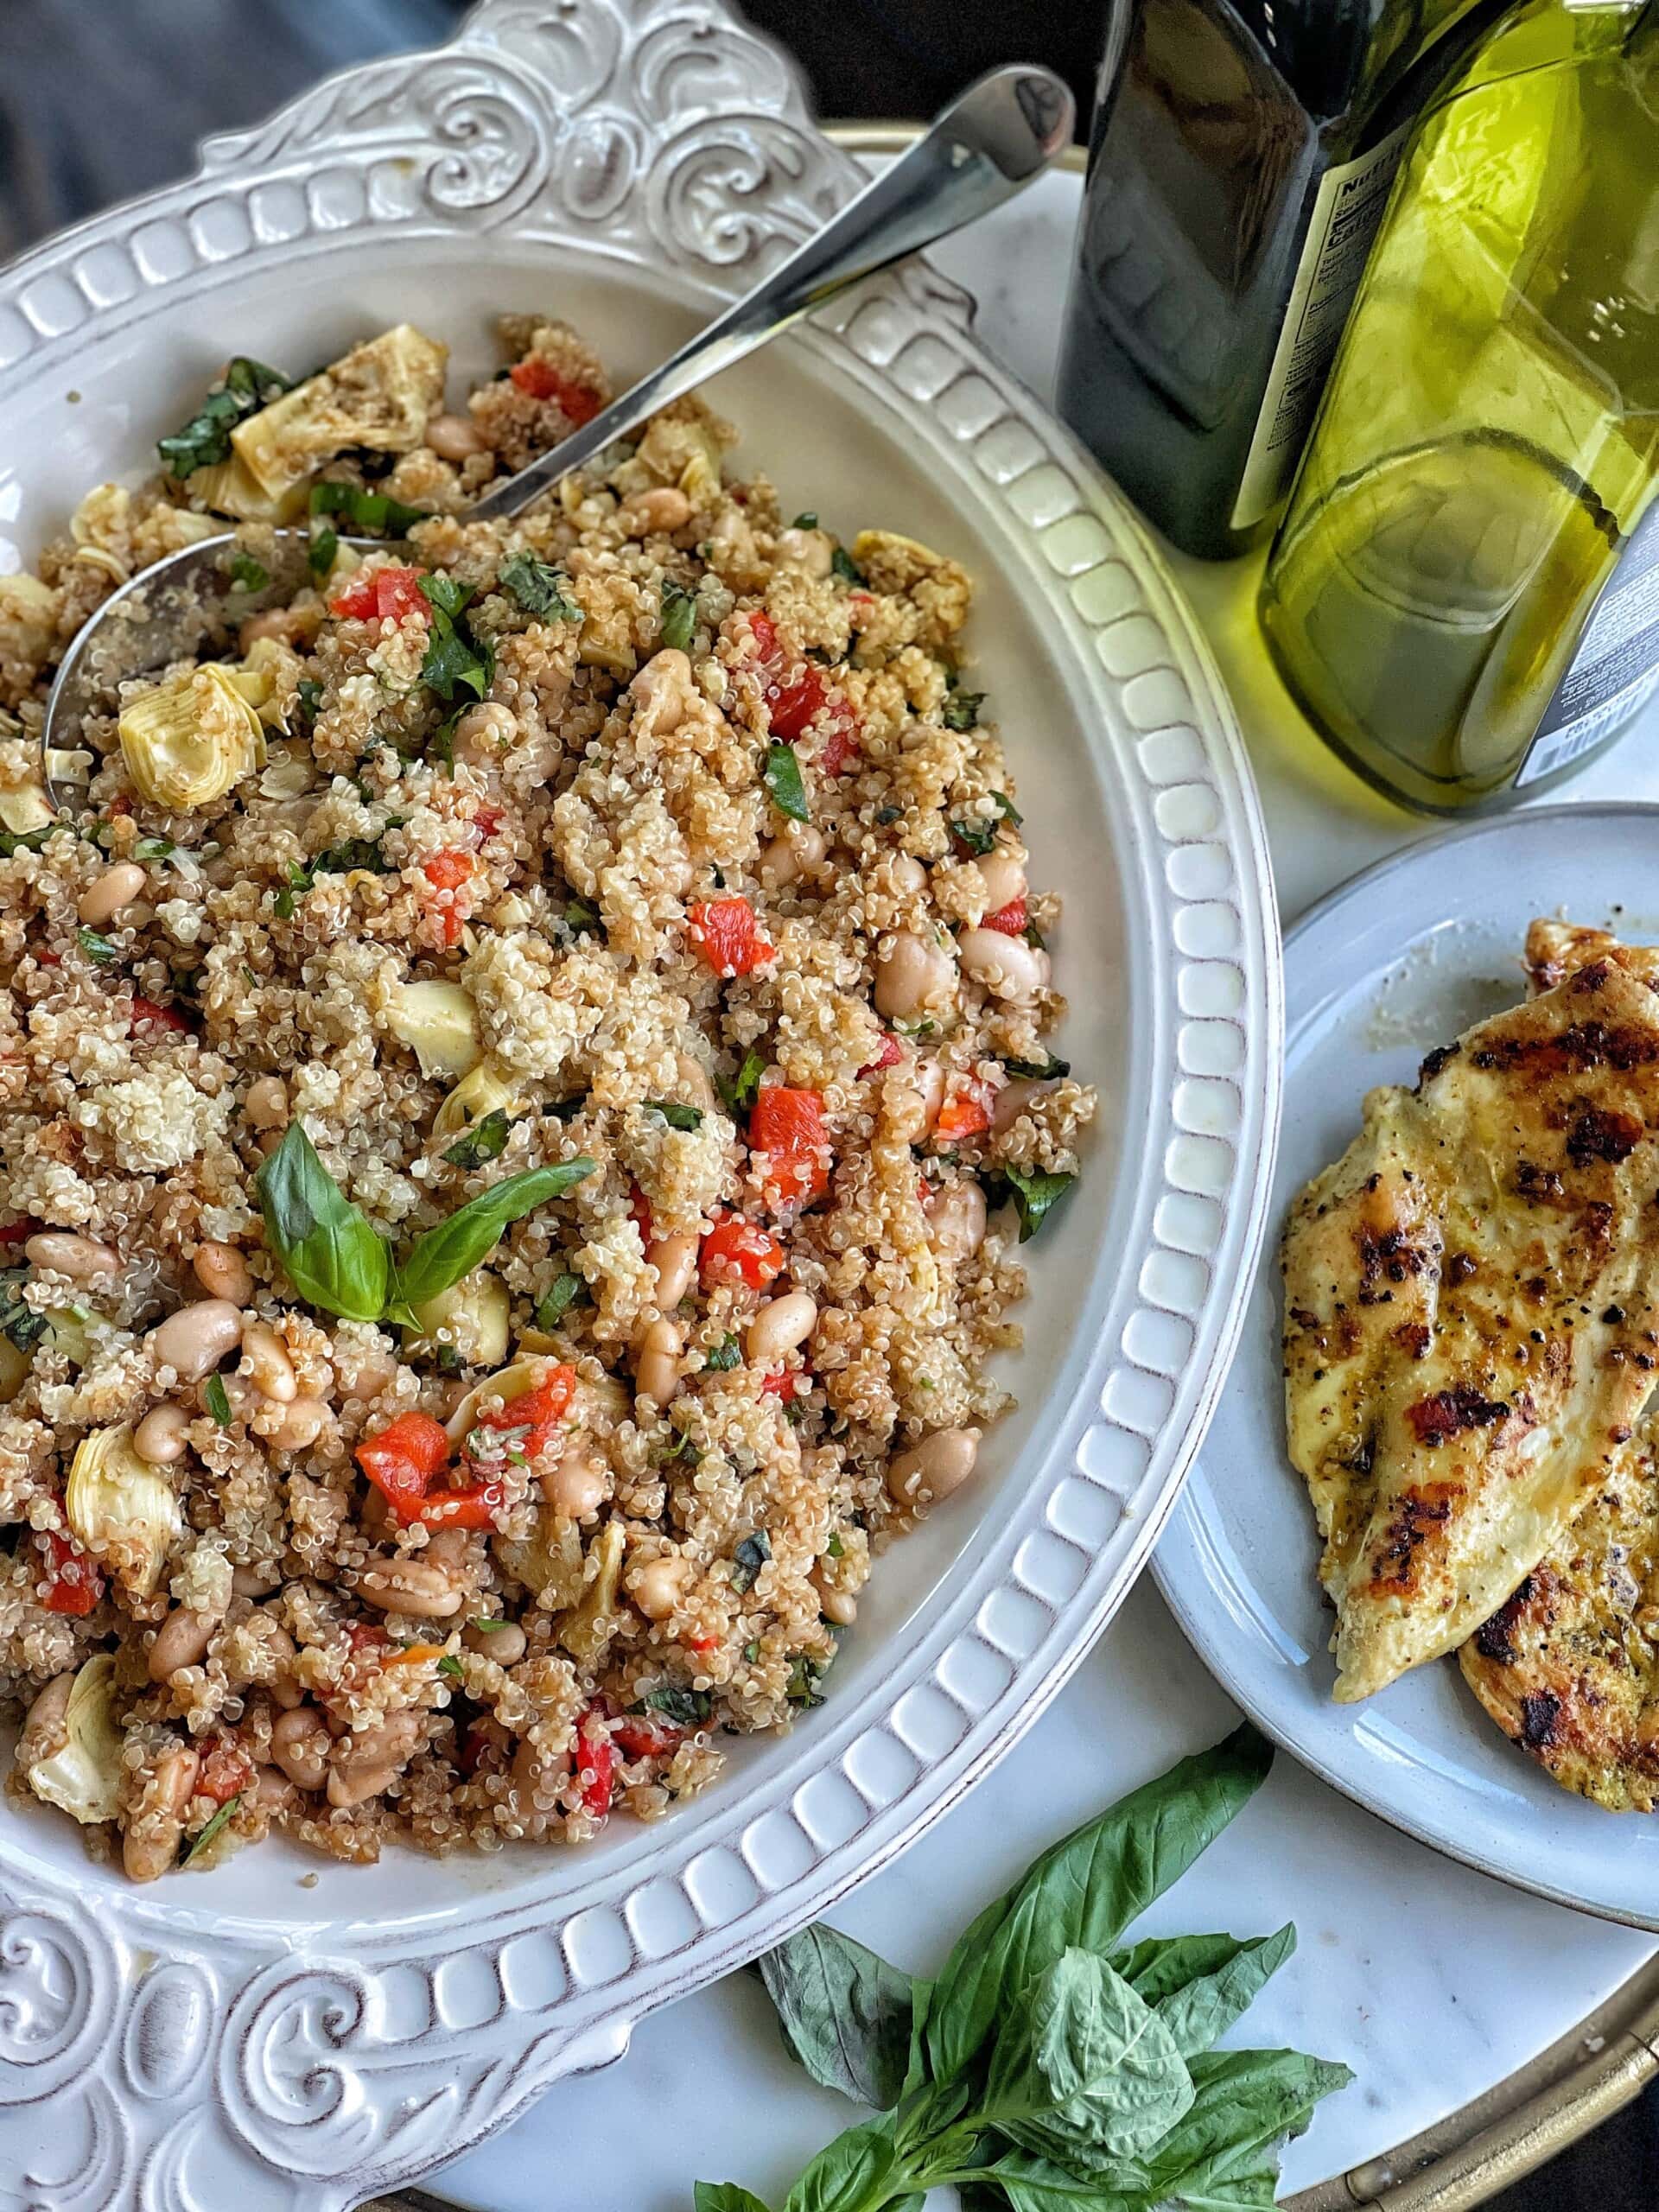 Italian Quinoa Salad with Vegetables and Cannellini Beans